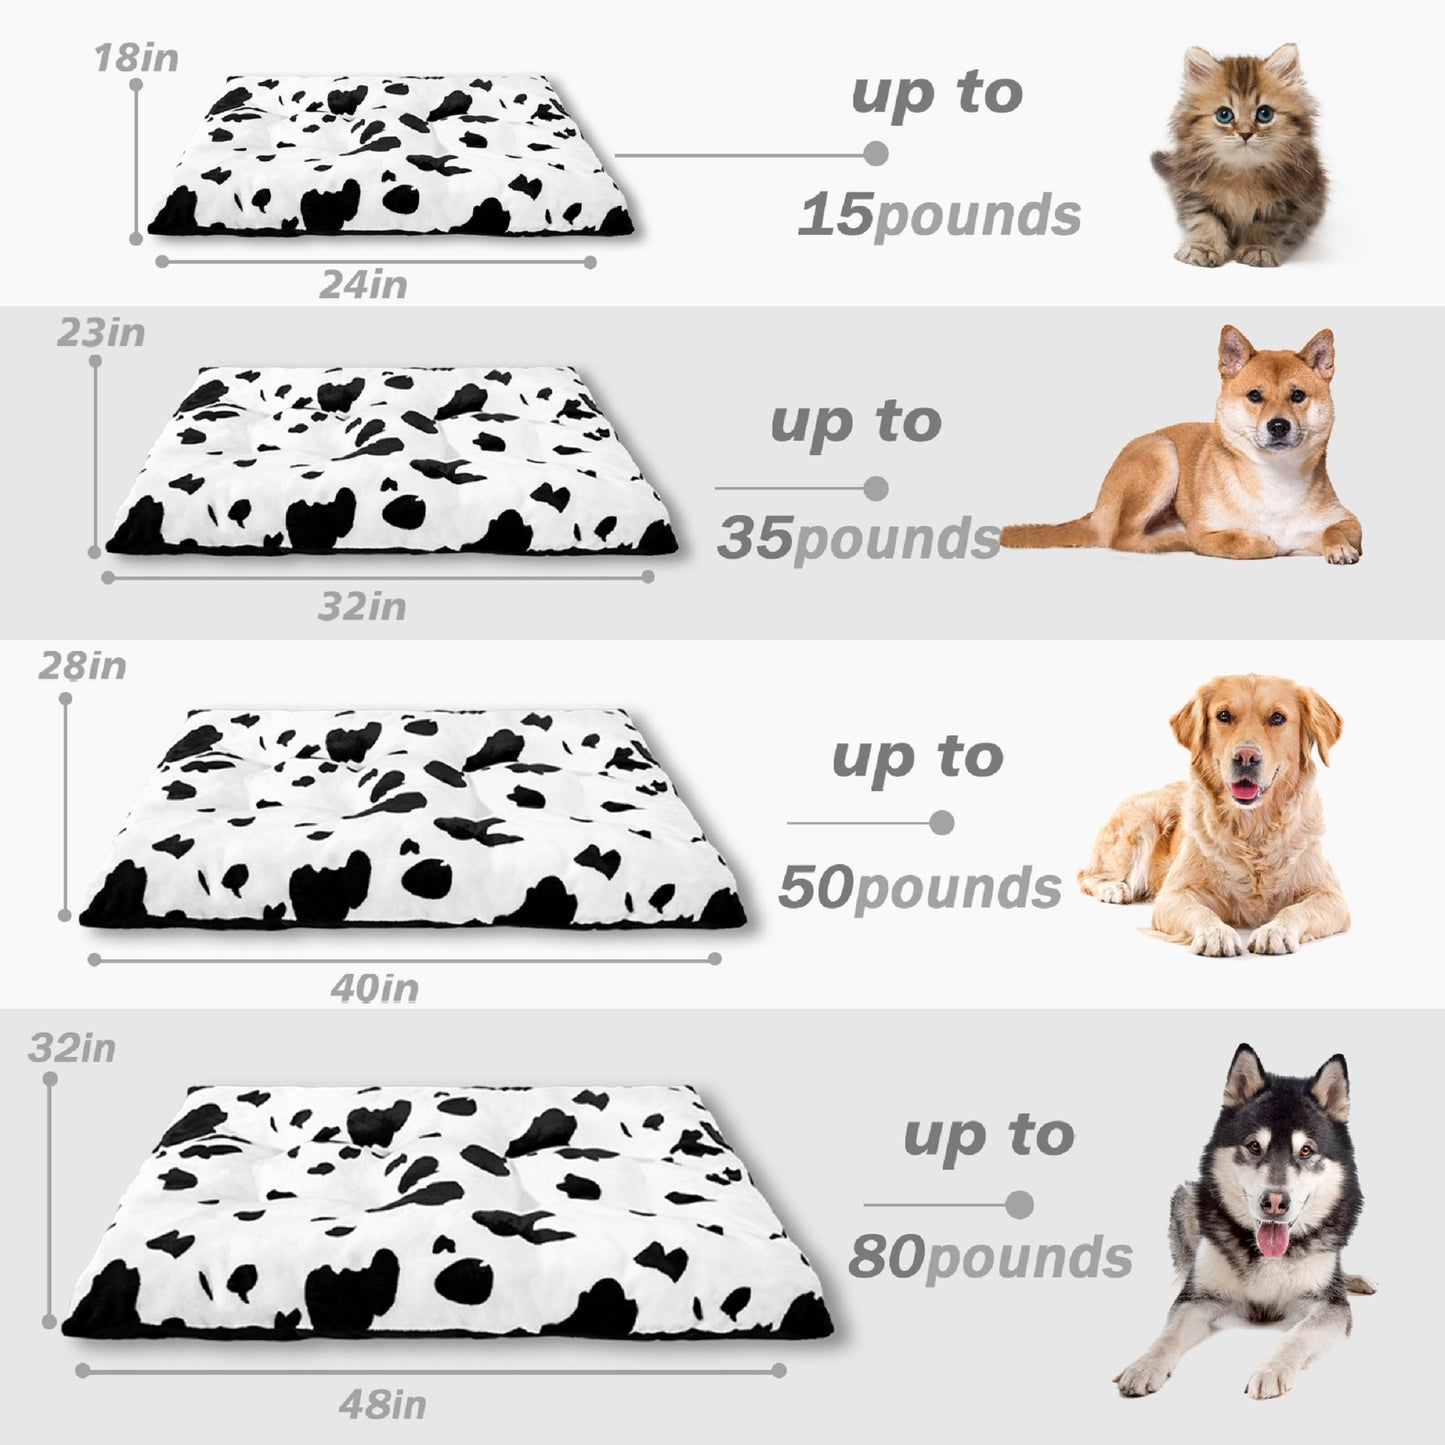 Exclusivo Mezcla Soft Dog Bed Crate Mat for Small Dogs (26x20x4 in), Flannel Fleece Cow Print Dog Pet Cat Kennel Pad with Anti-Slip Bottom, Machine Washable